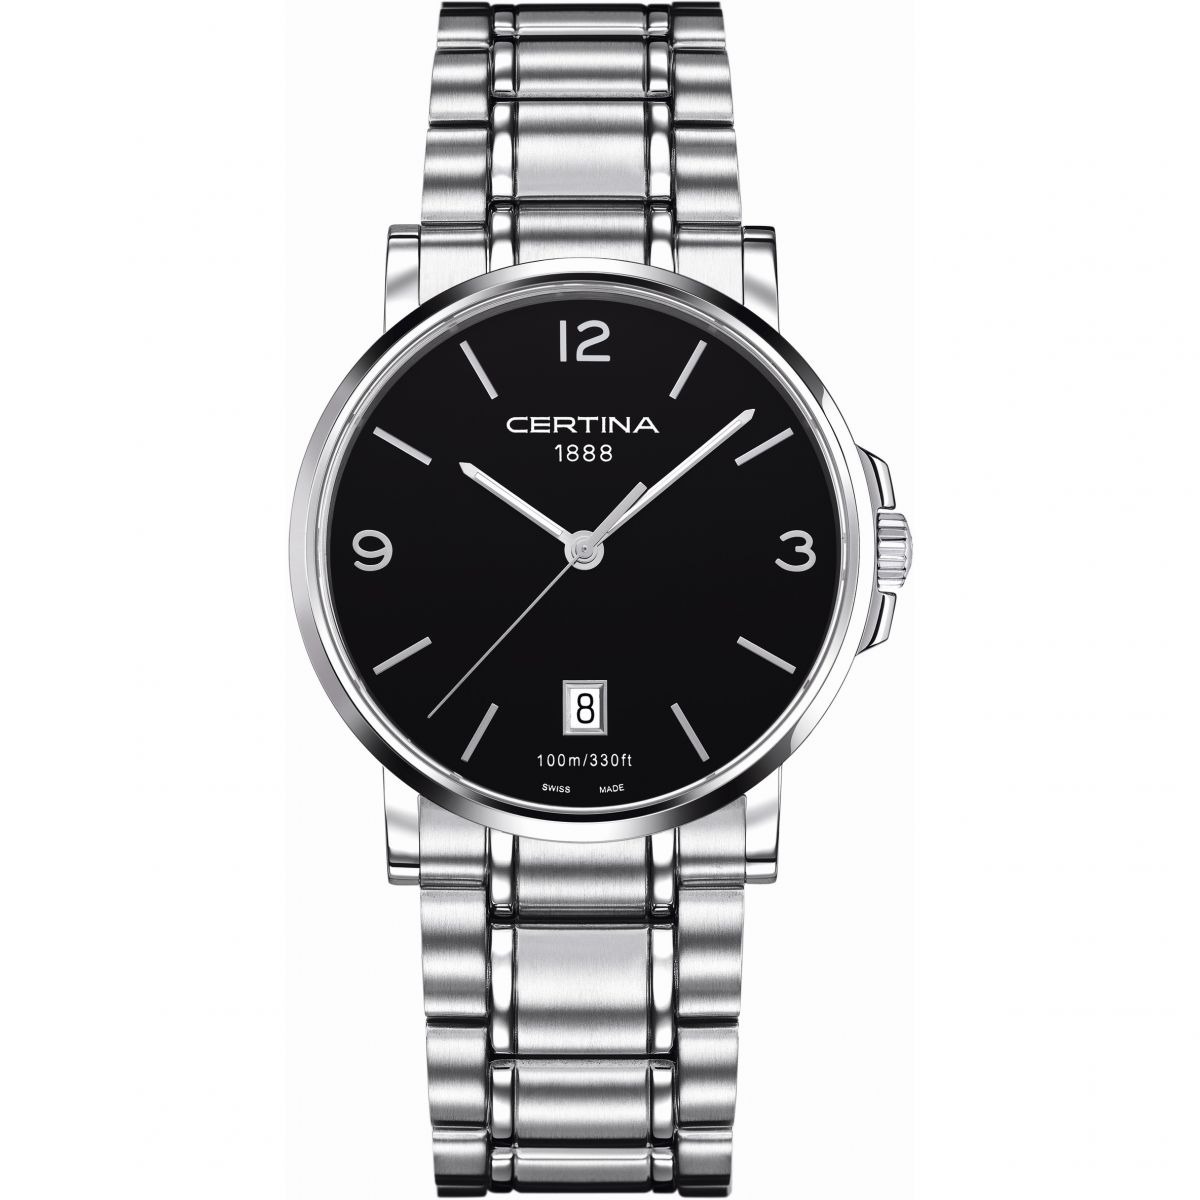 Certina Watch in Black for Man by Watch Shop GOOFASH